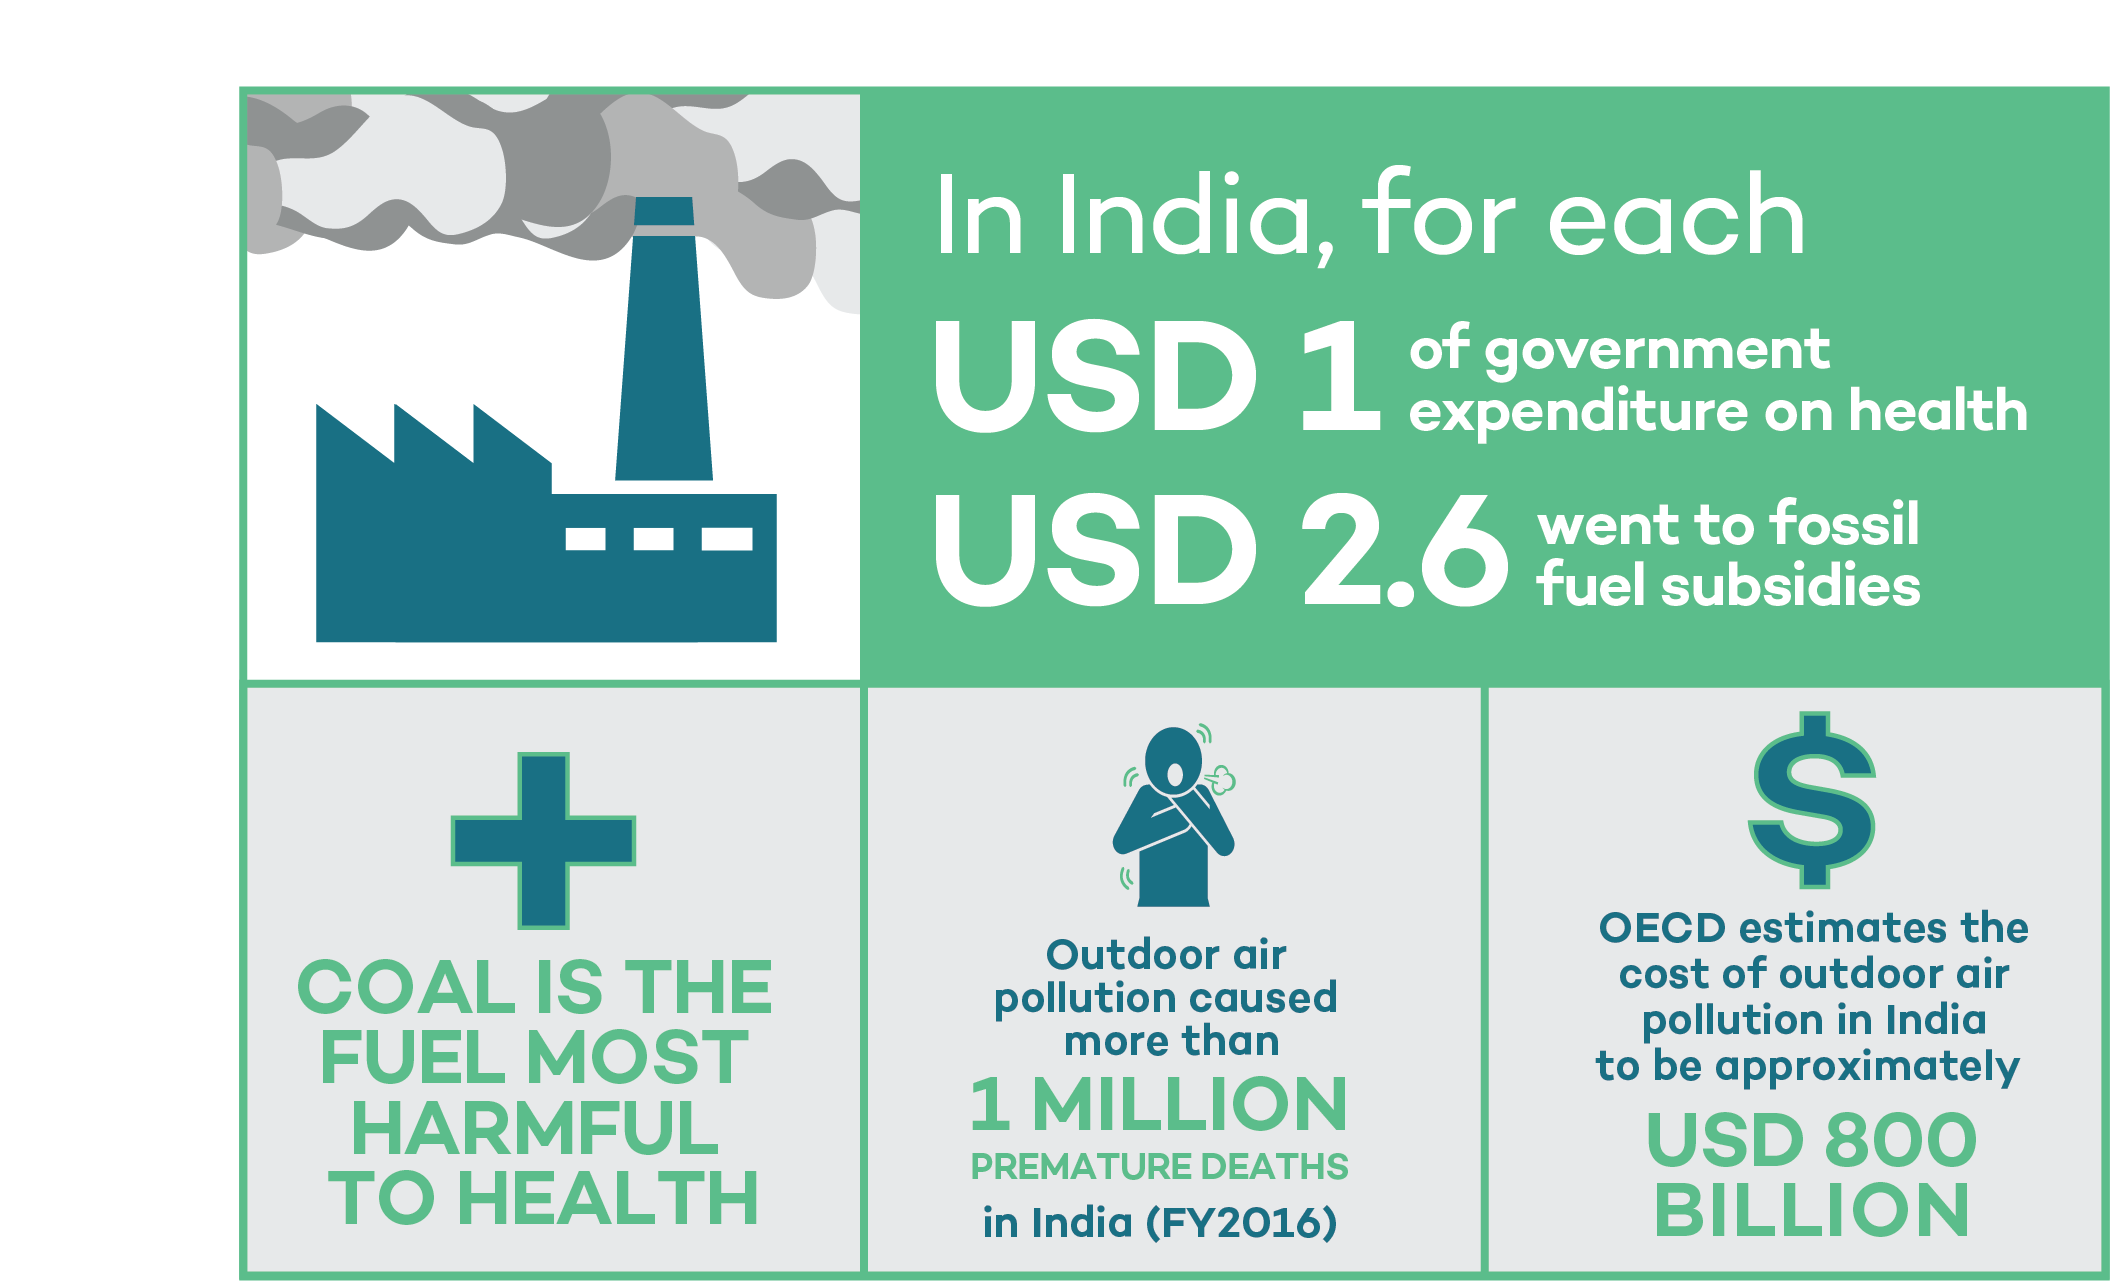 public health expenditure that could be achieved from reforming coal subsidies